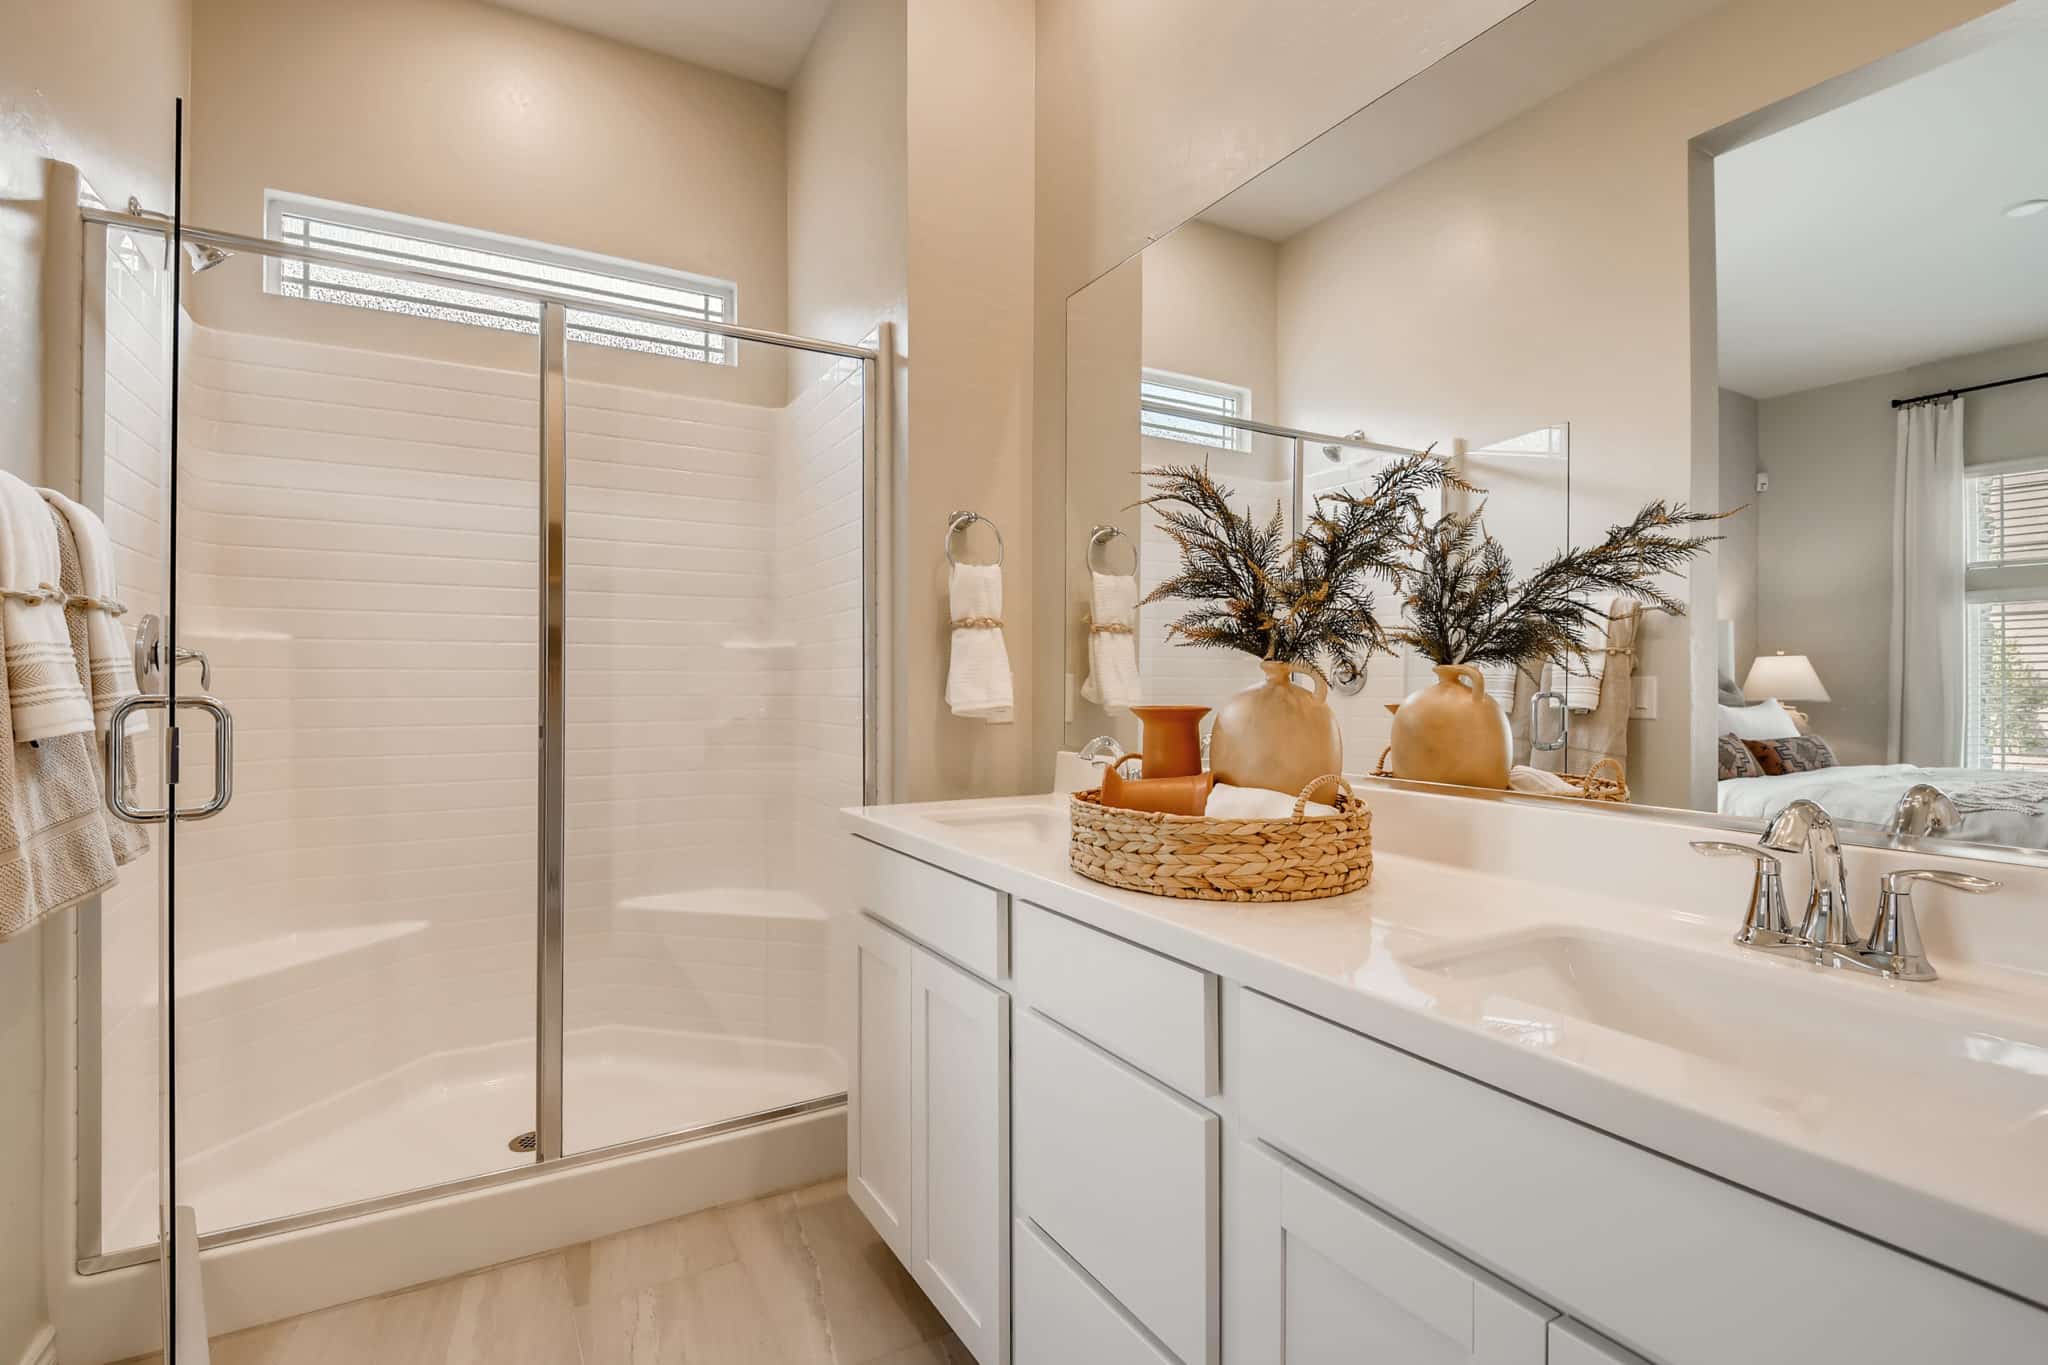 Primary Bathroom of Connery model at Heritage by Lennar